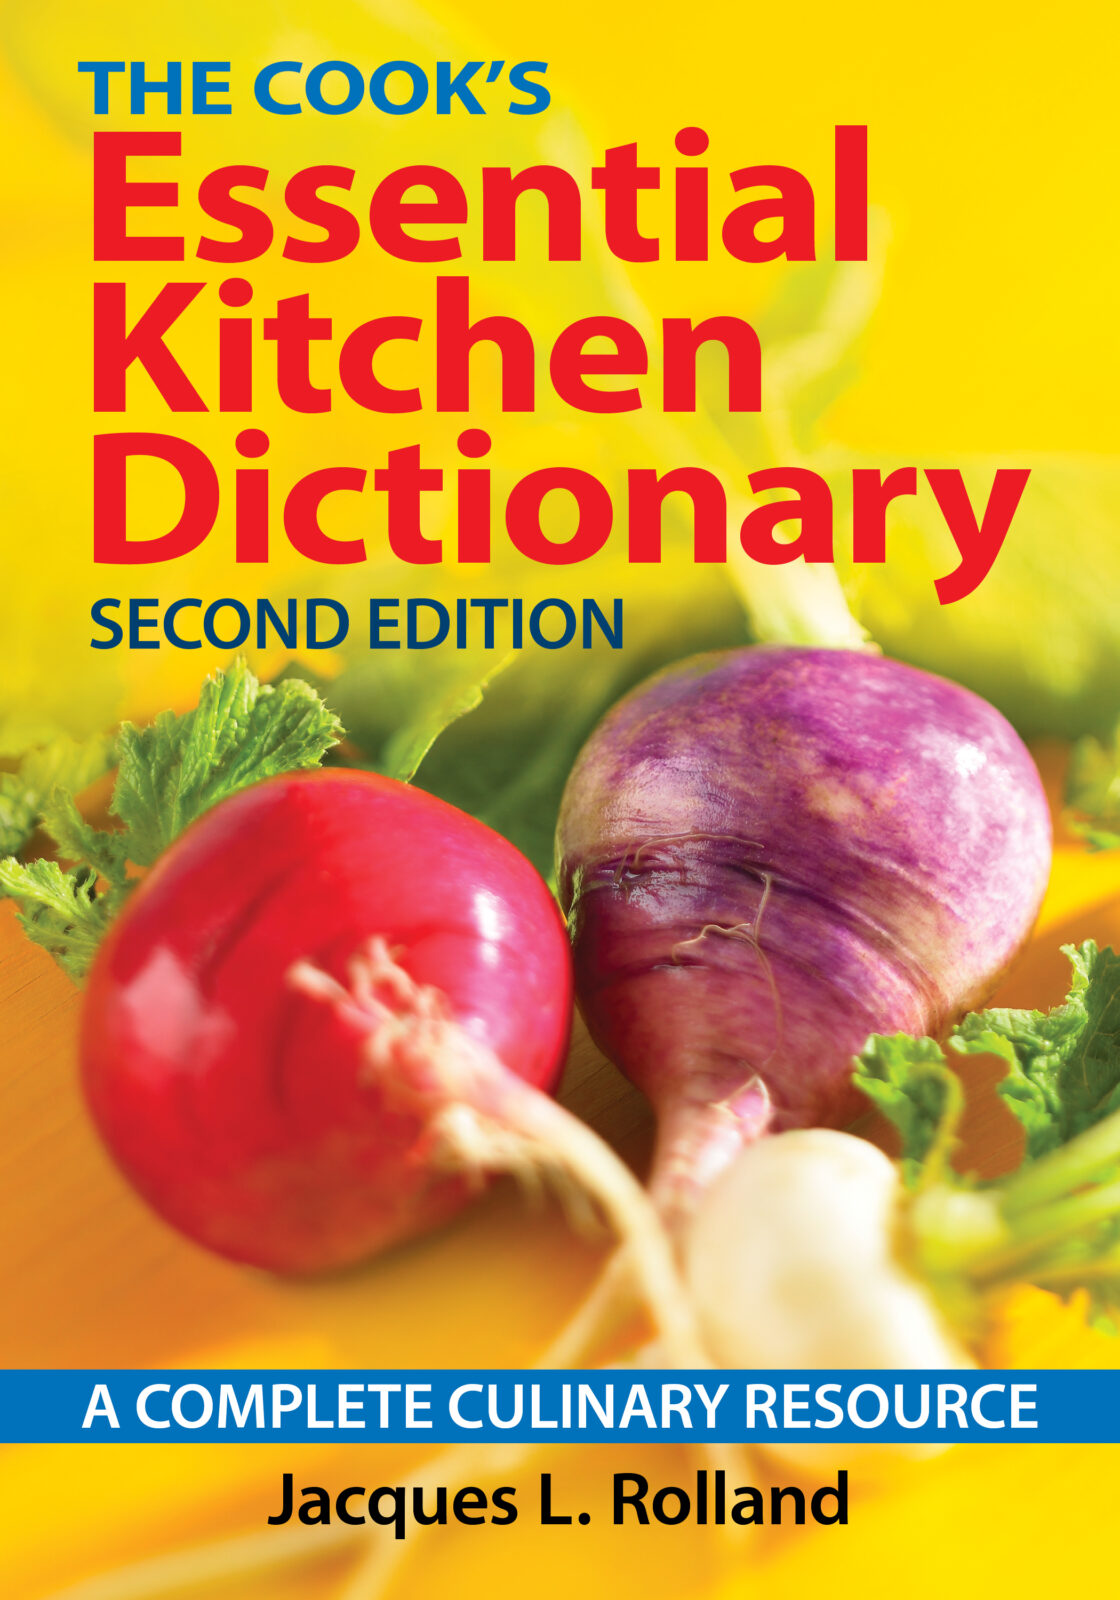 The Cook’s Essential Kitchen Dictionary